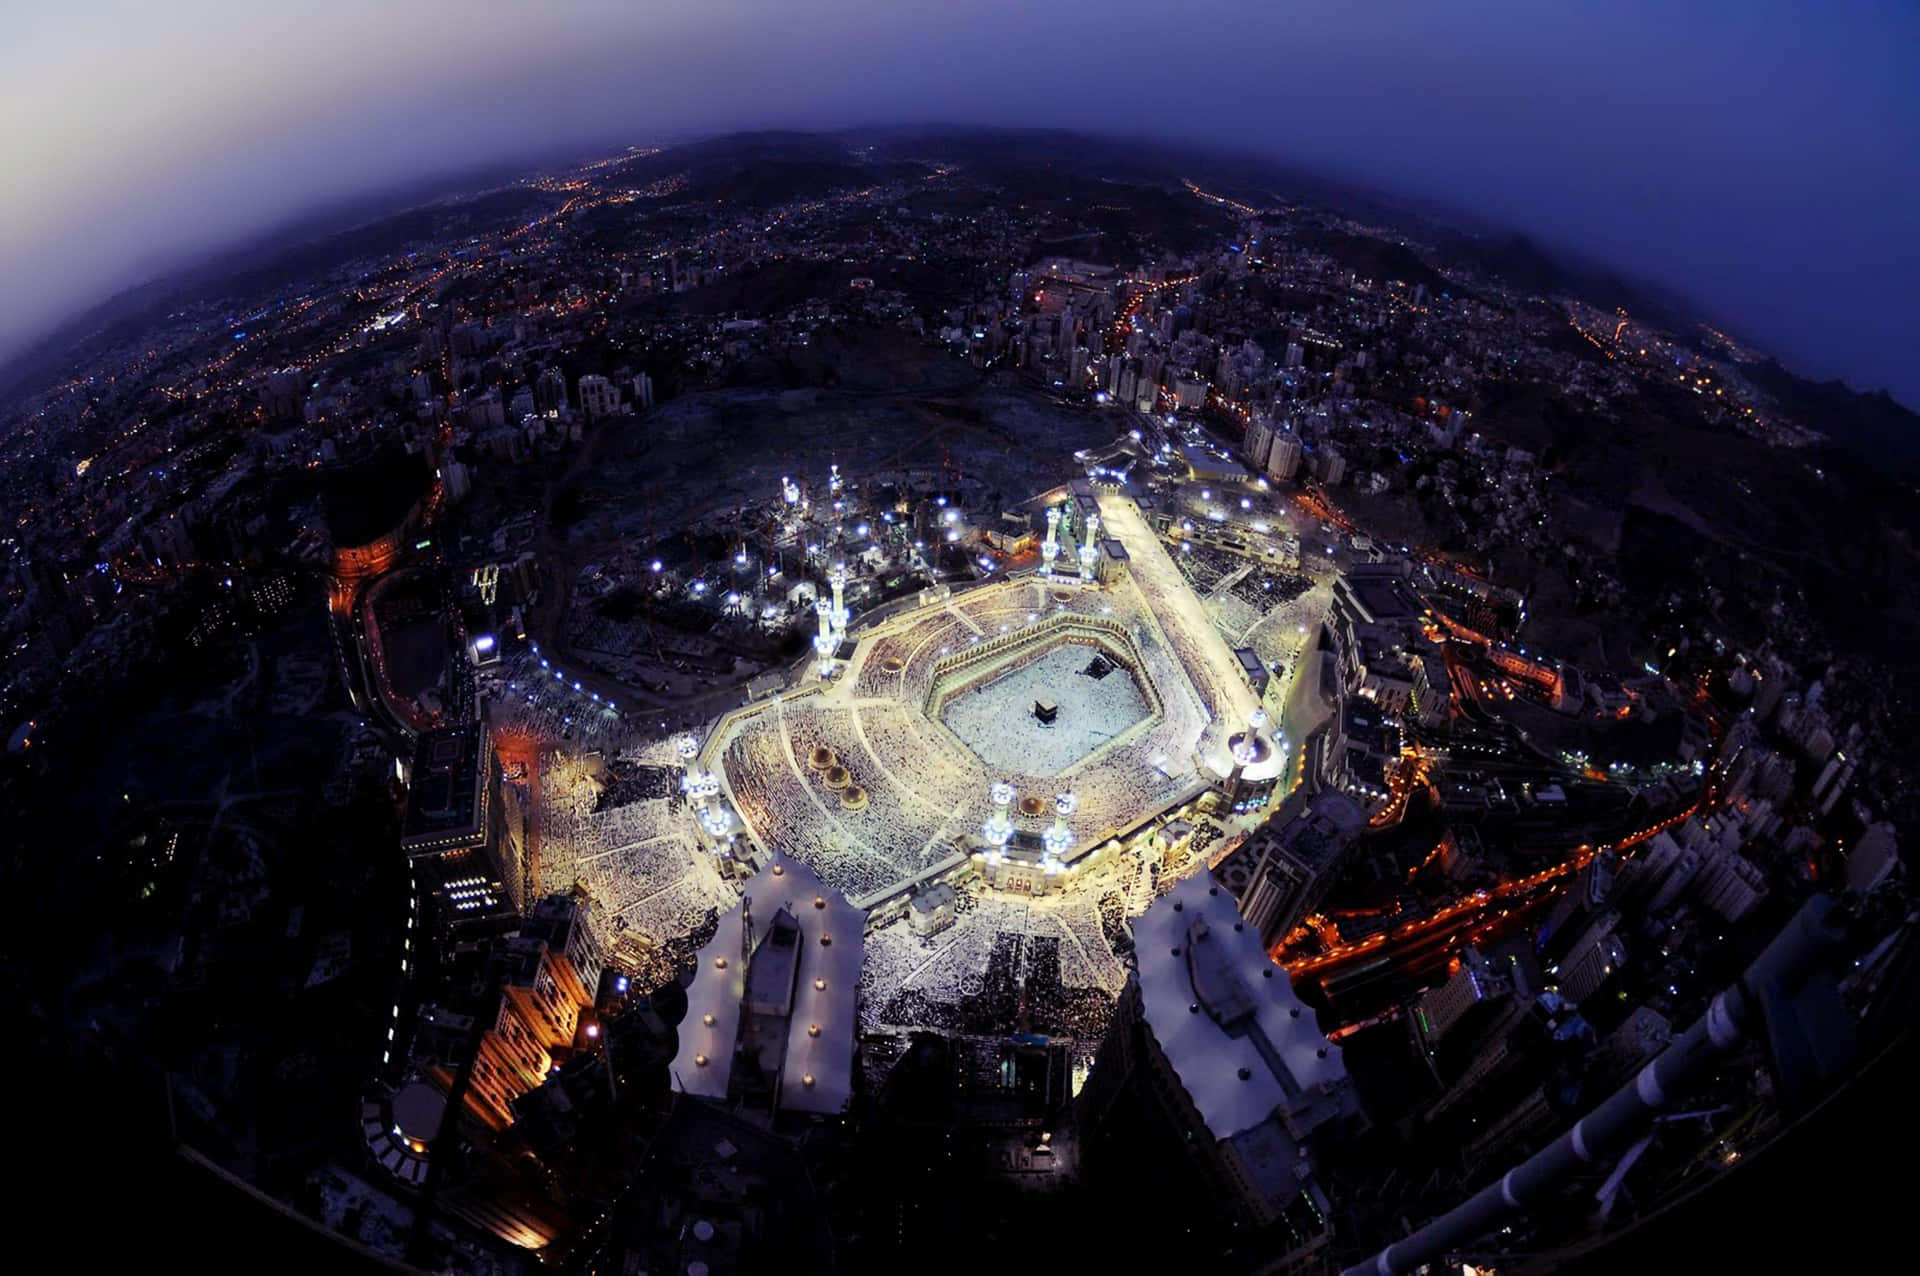 A View Of The Kaaba At Night